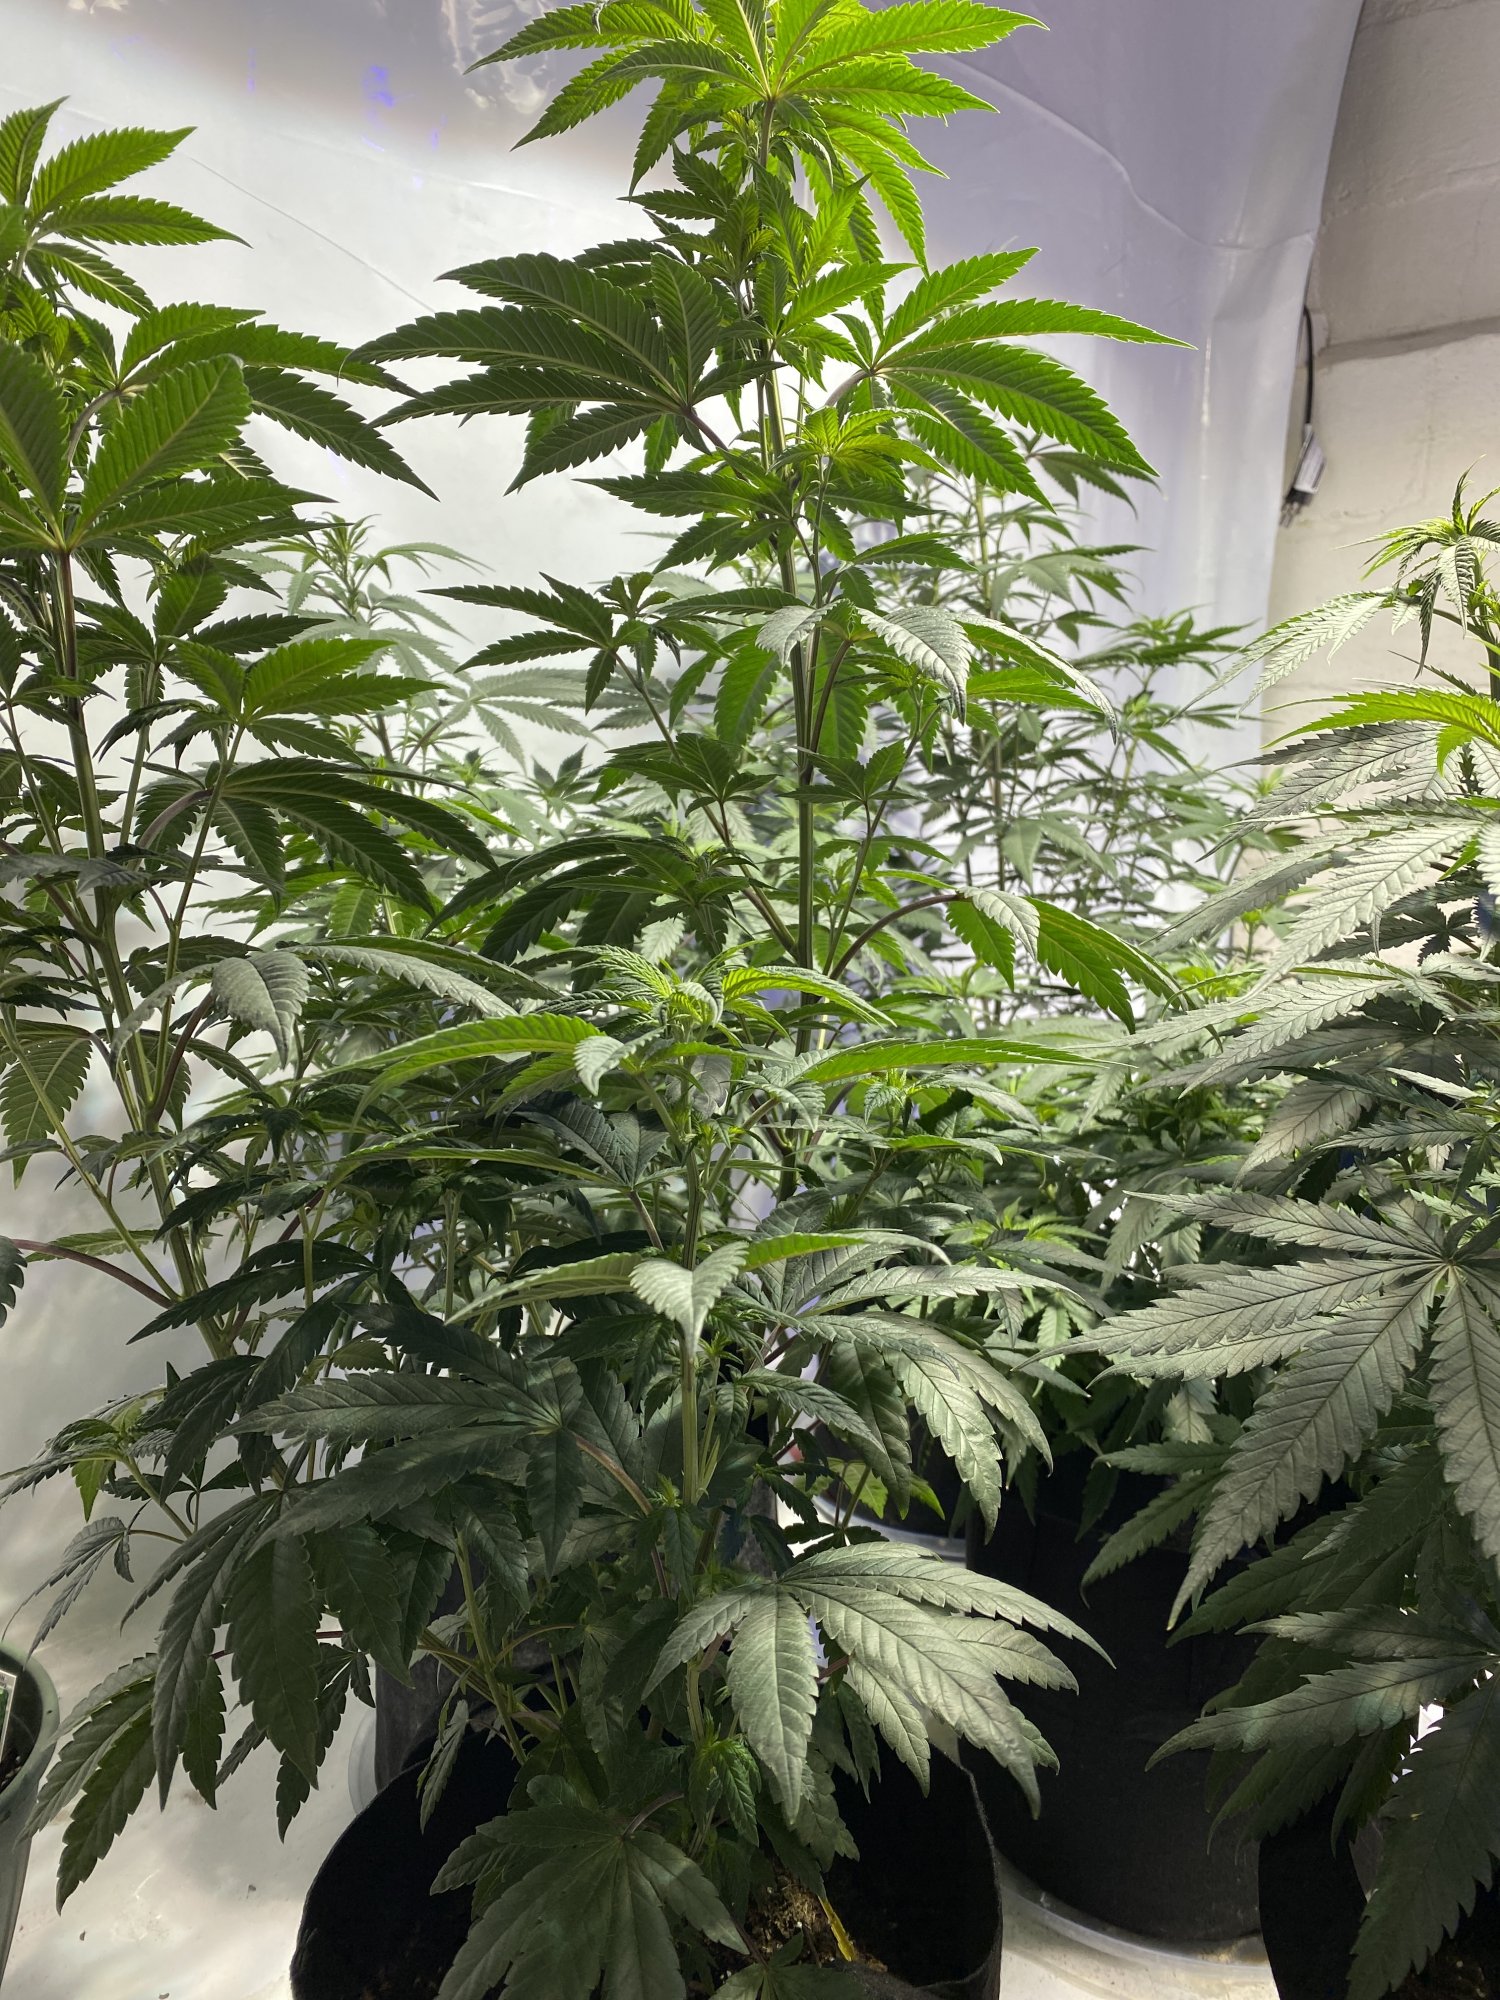 Suggestions before switching for 2nd grow 3